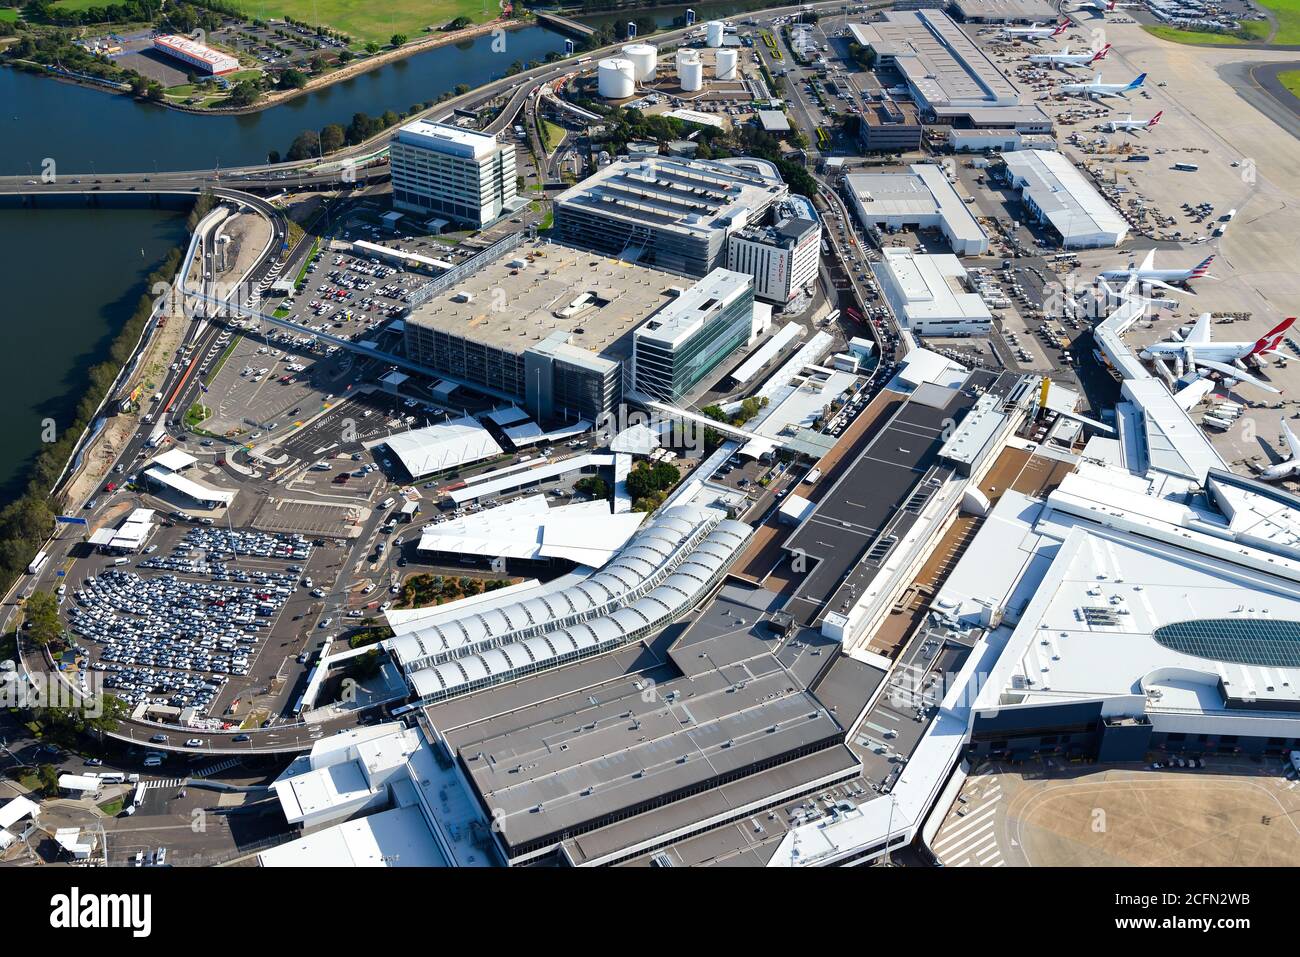 Sydney Airport aerial view with international passengers Terminal 1. Airport parking garages and access roads. Stock Photo